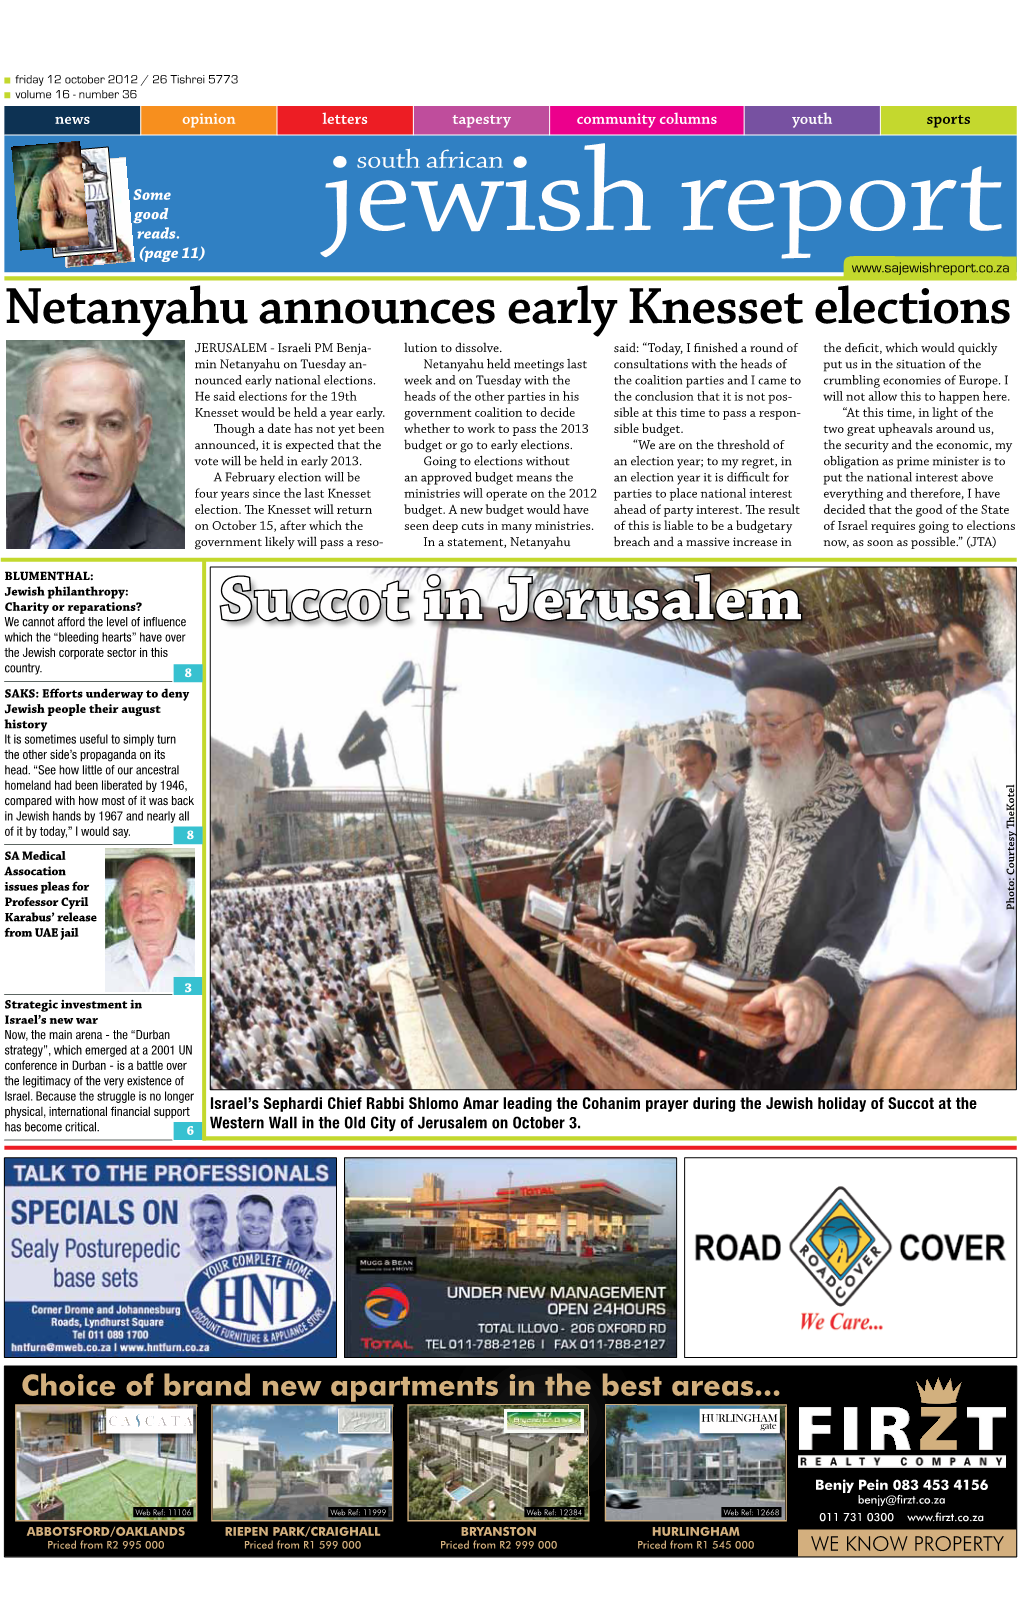 12 October 2012 / 26 Tishrei 5773 Volume 16 - Number 36 News Opinion Letters Tapestry Community Columns Youth Sports South African Some Good Reads